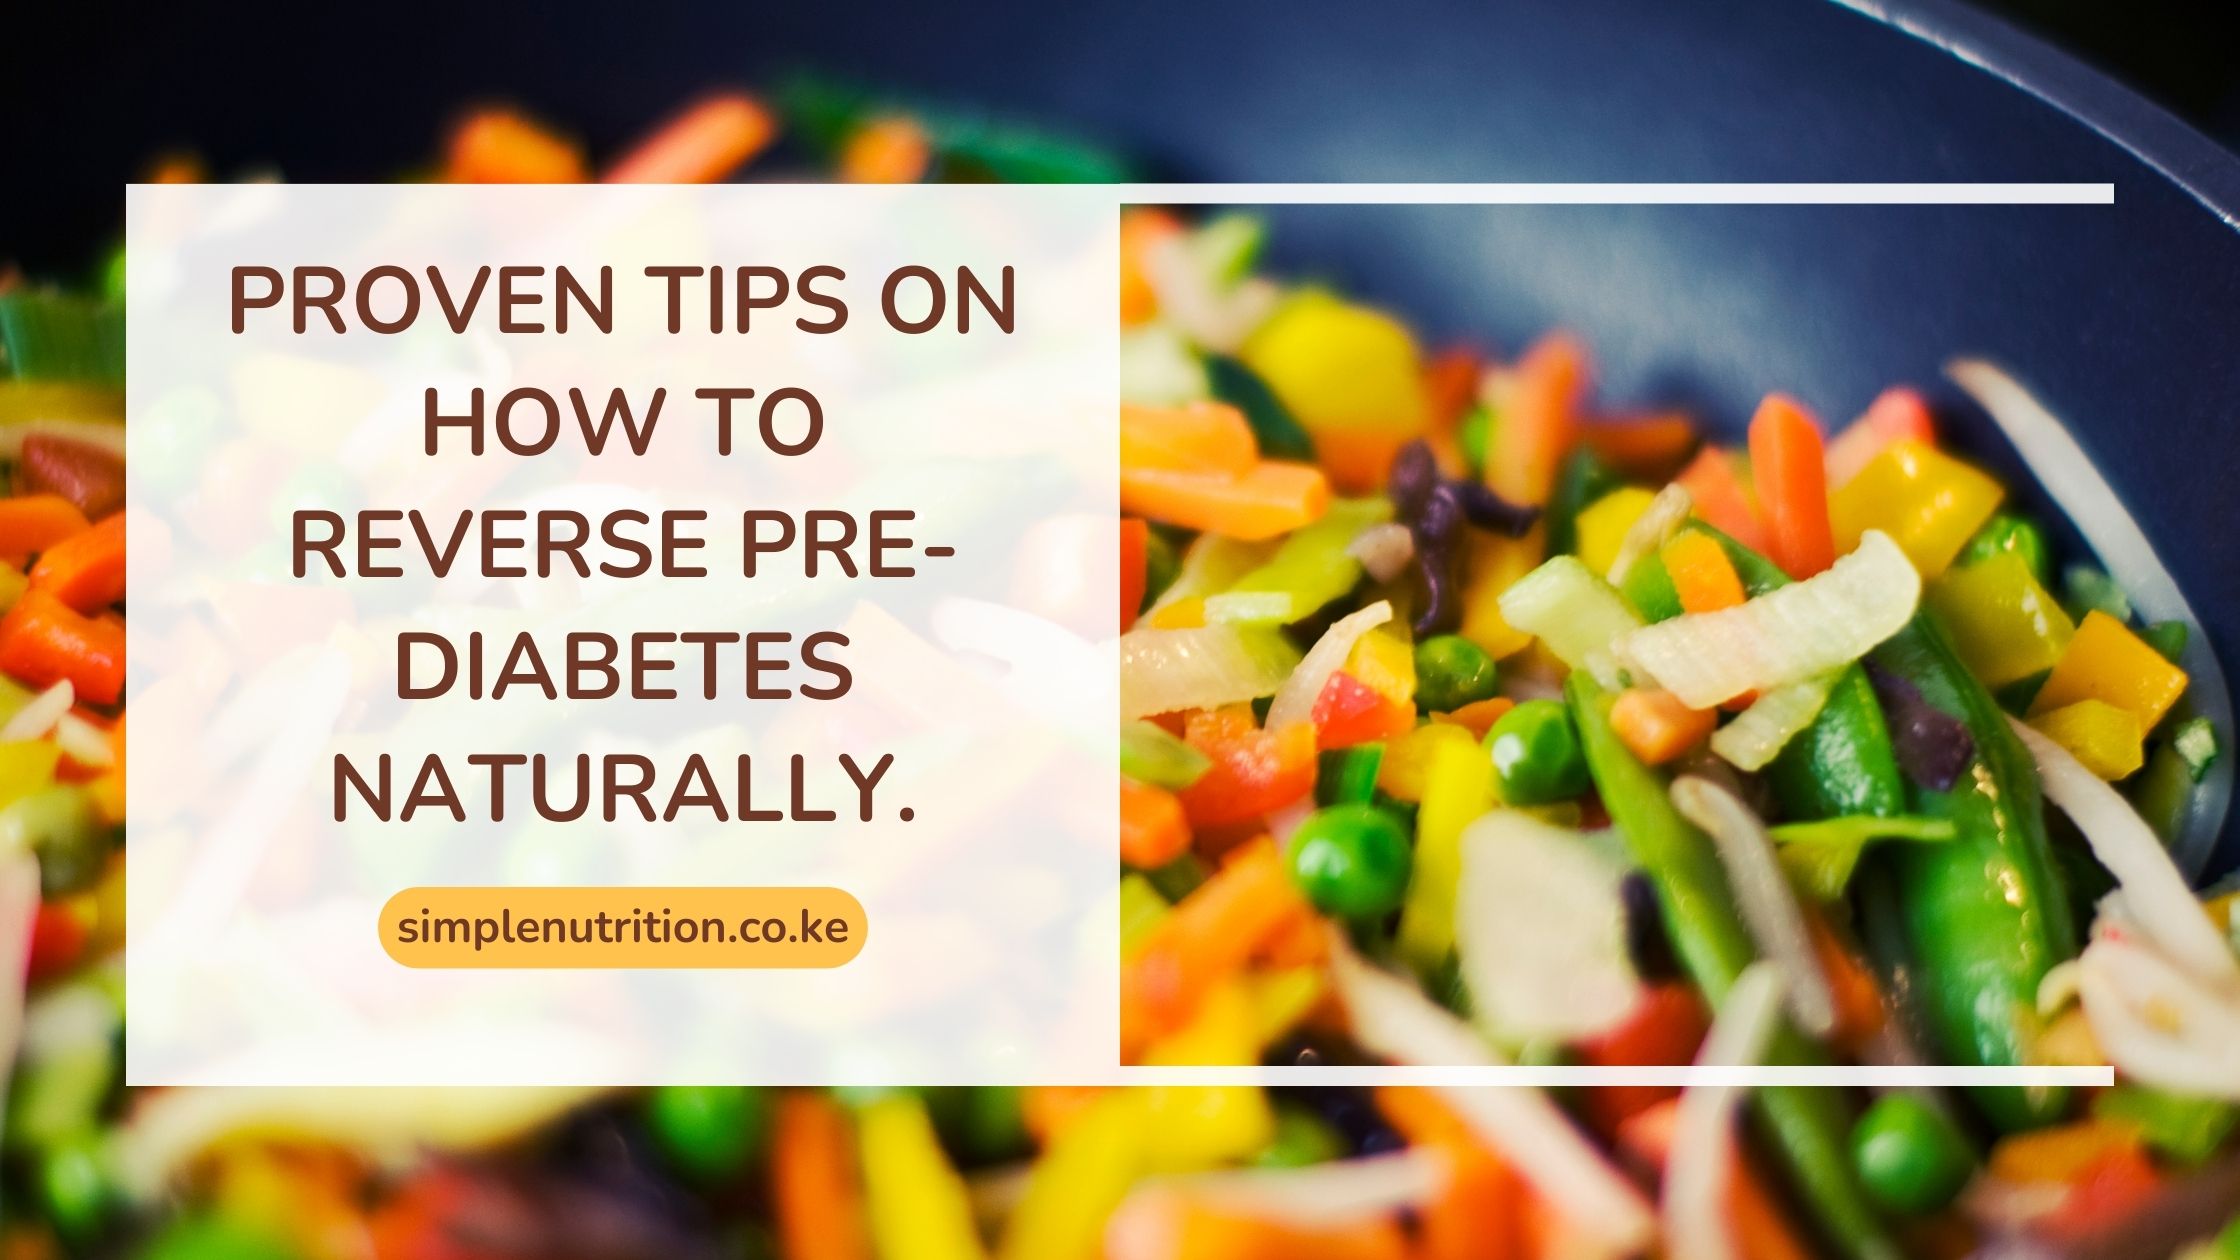 Proven Tips on How to Reverse Pre-Diabetes Naturally